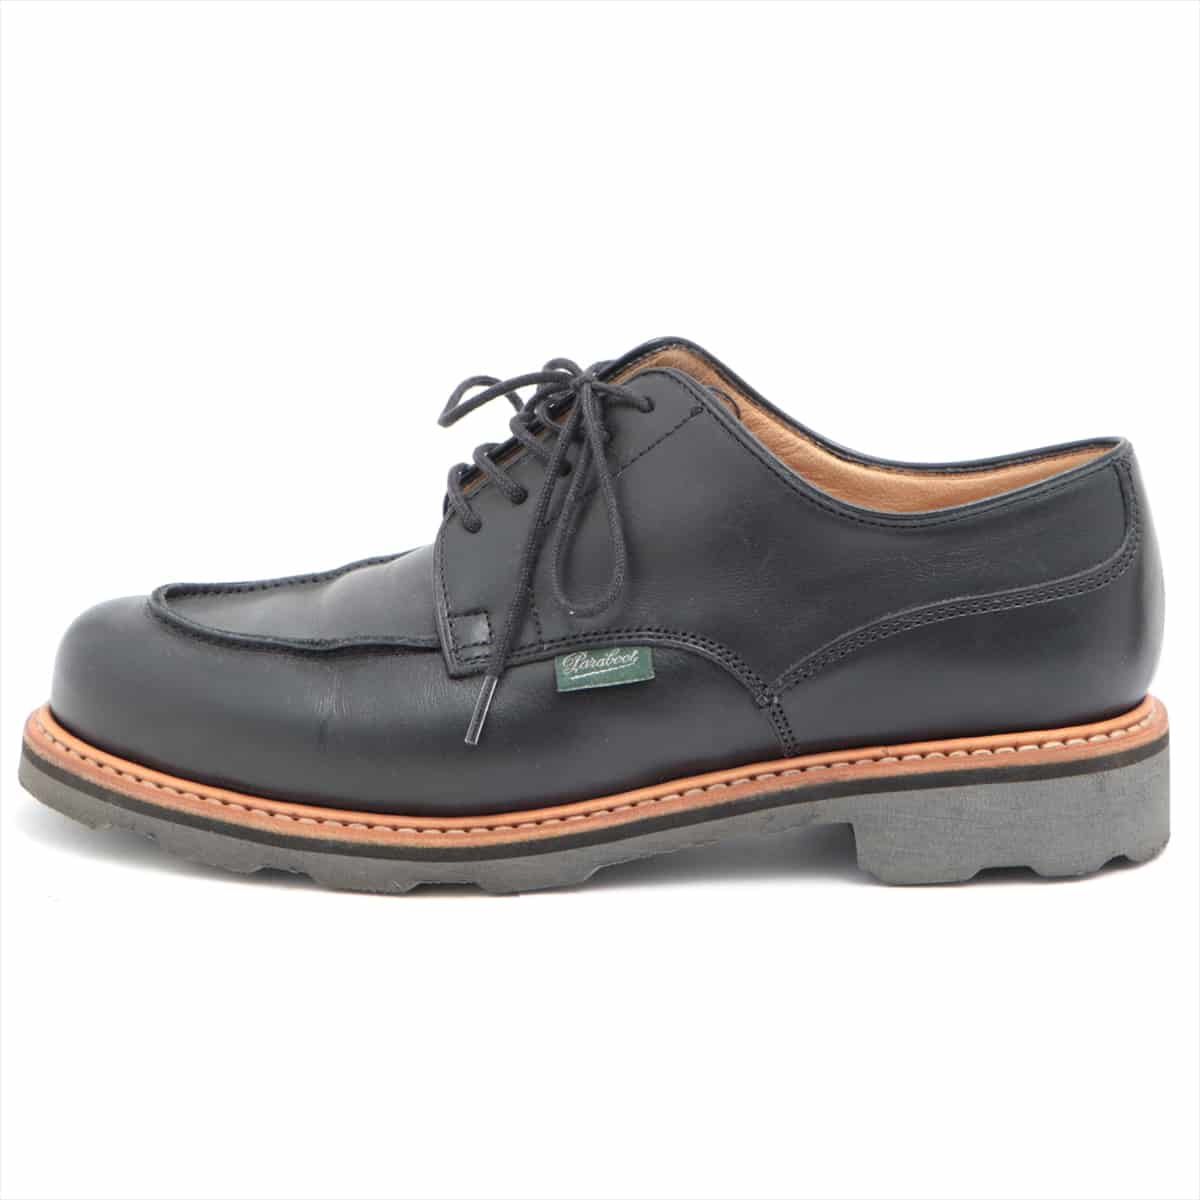 Paraboot Leather Leather shoes 4 Ladies' Black BEAUTY AND YOUTH United Arrows bespoke